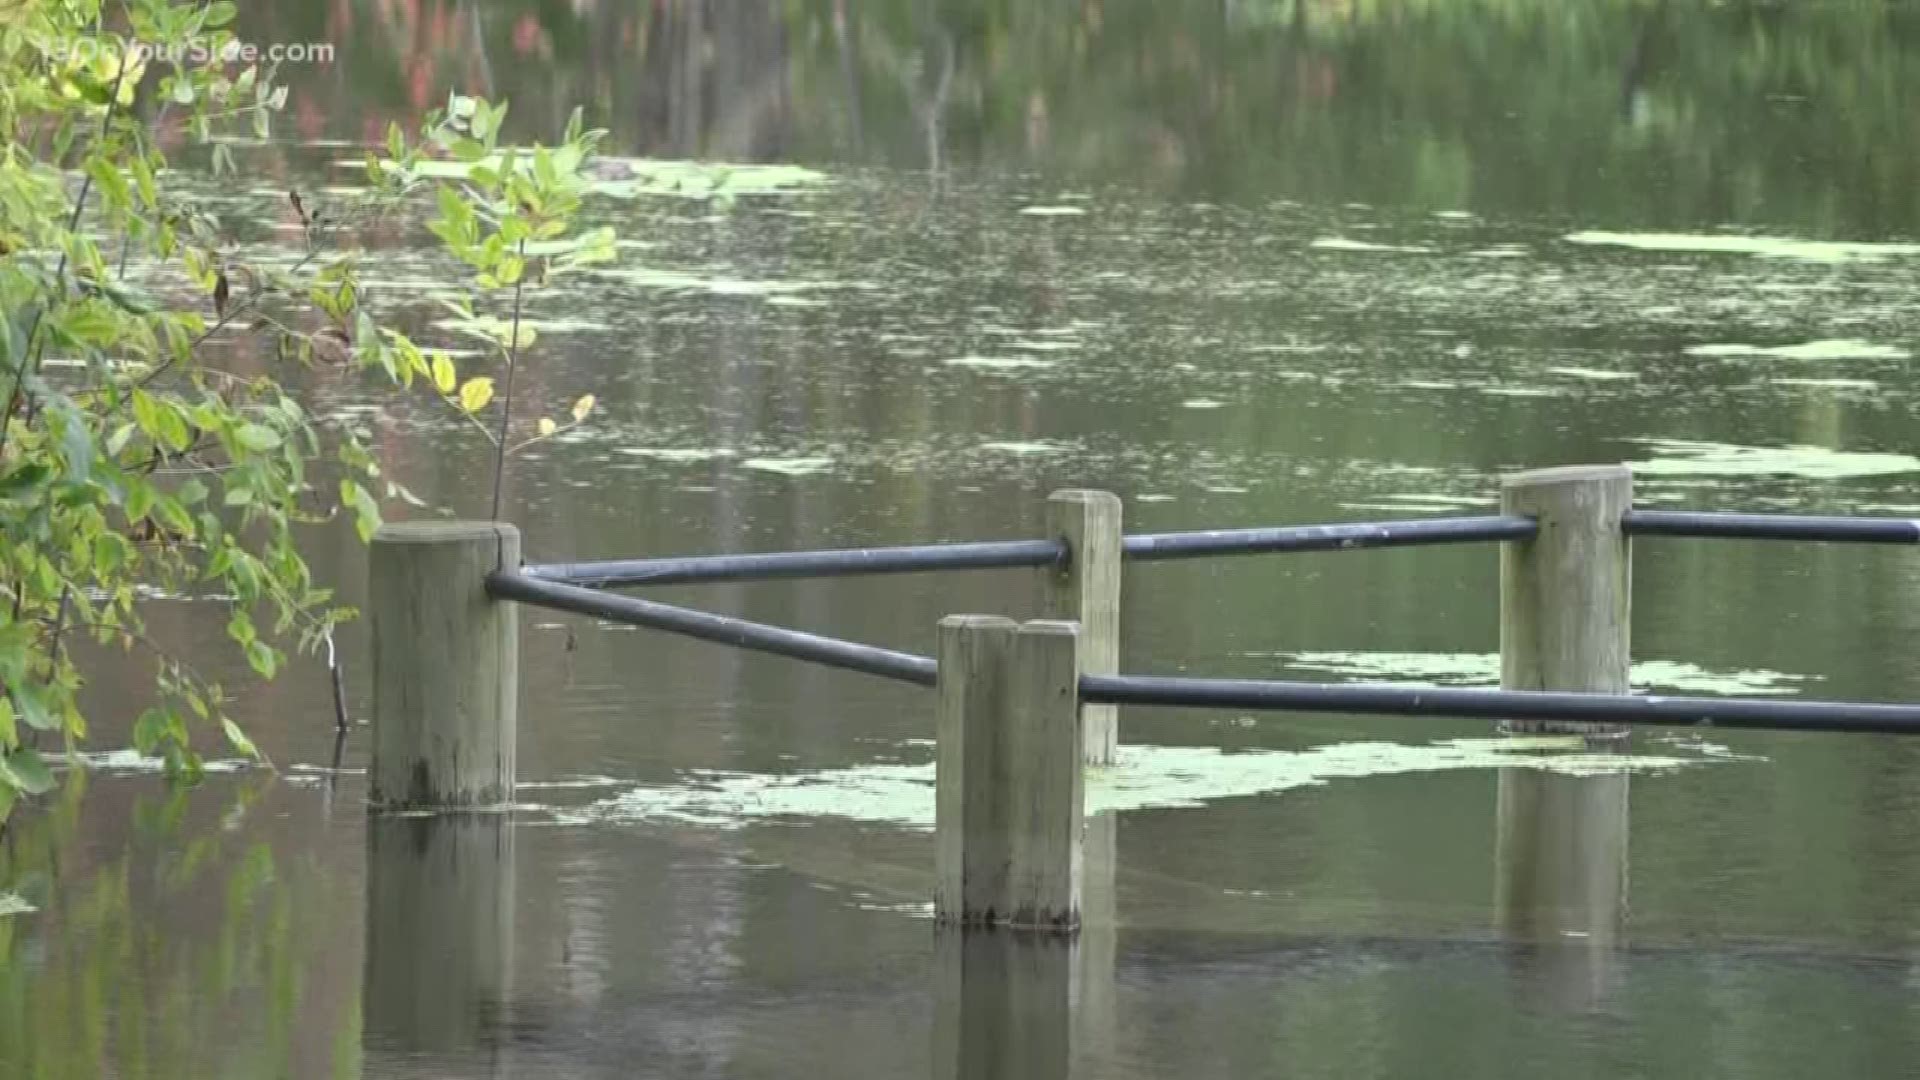 Last year millions of state dollars were dedicated to a project that would dredge up miles of the Grand River, but progress on the project has stopped.